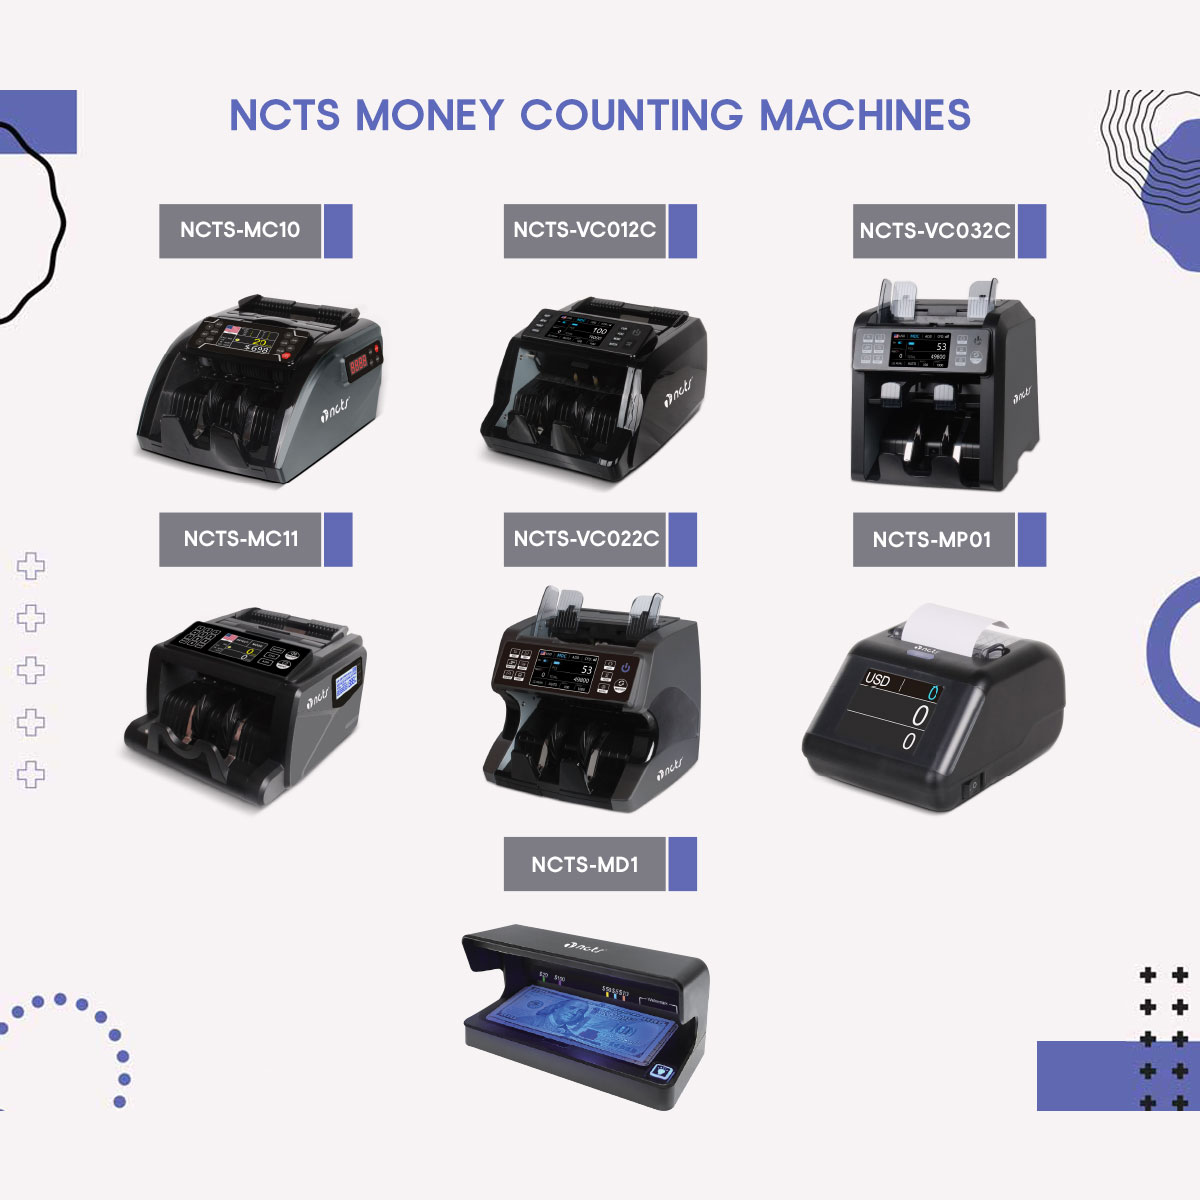 NCTS MONEY COUNTER